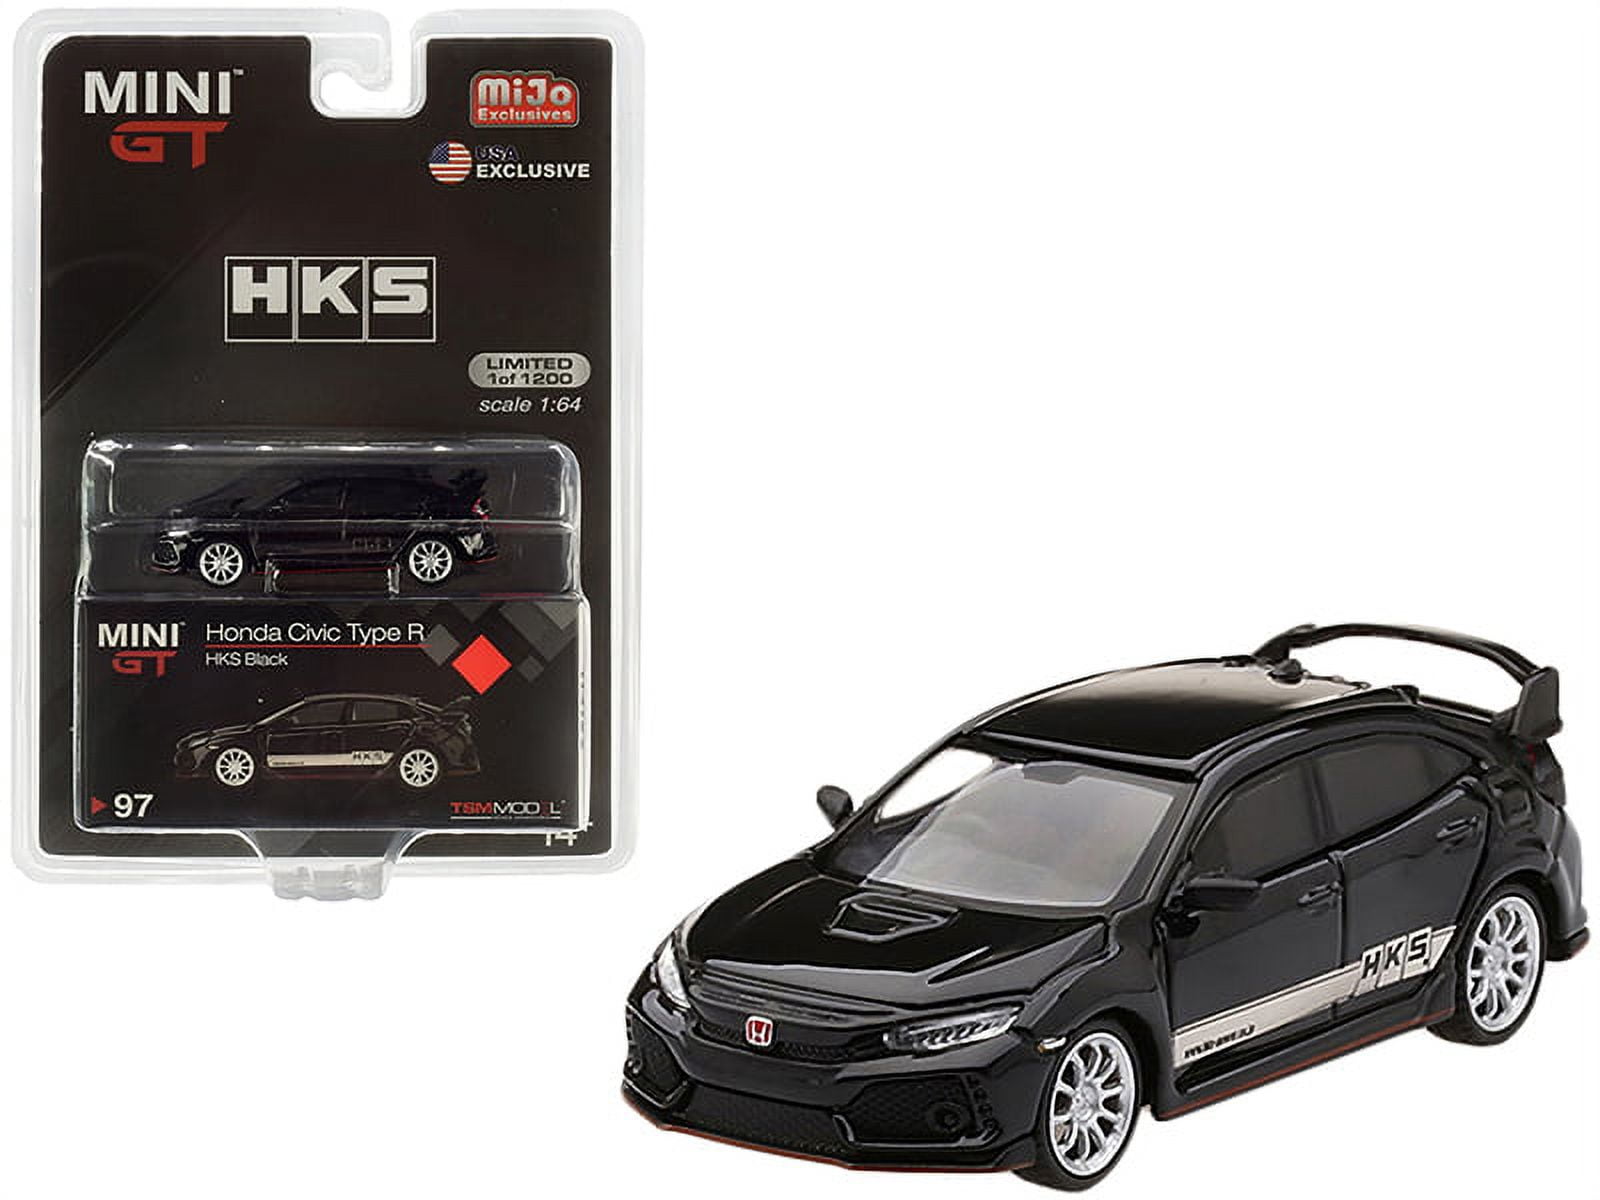 Diecast Honda Civic Type R (FK8) RHD (Right Hand Drive) Black with White  Stripes HKS Limited Edition to 1200 pieces Worldwide 1/64 Diecast Model  Car